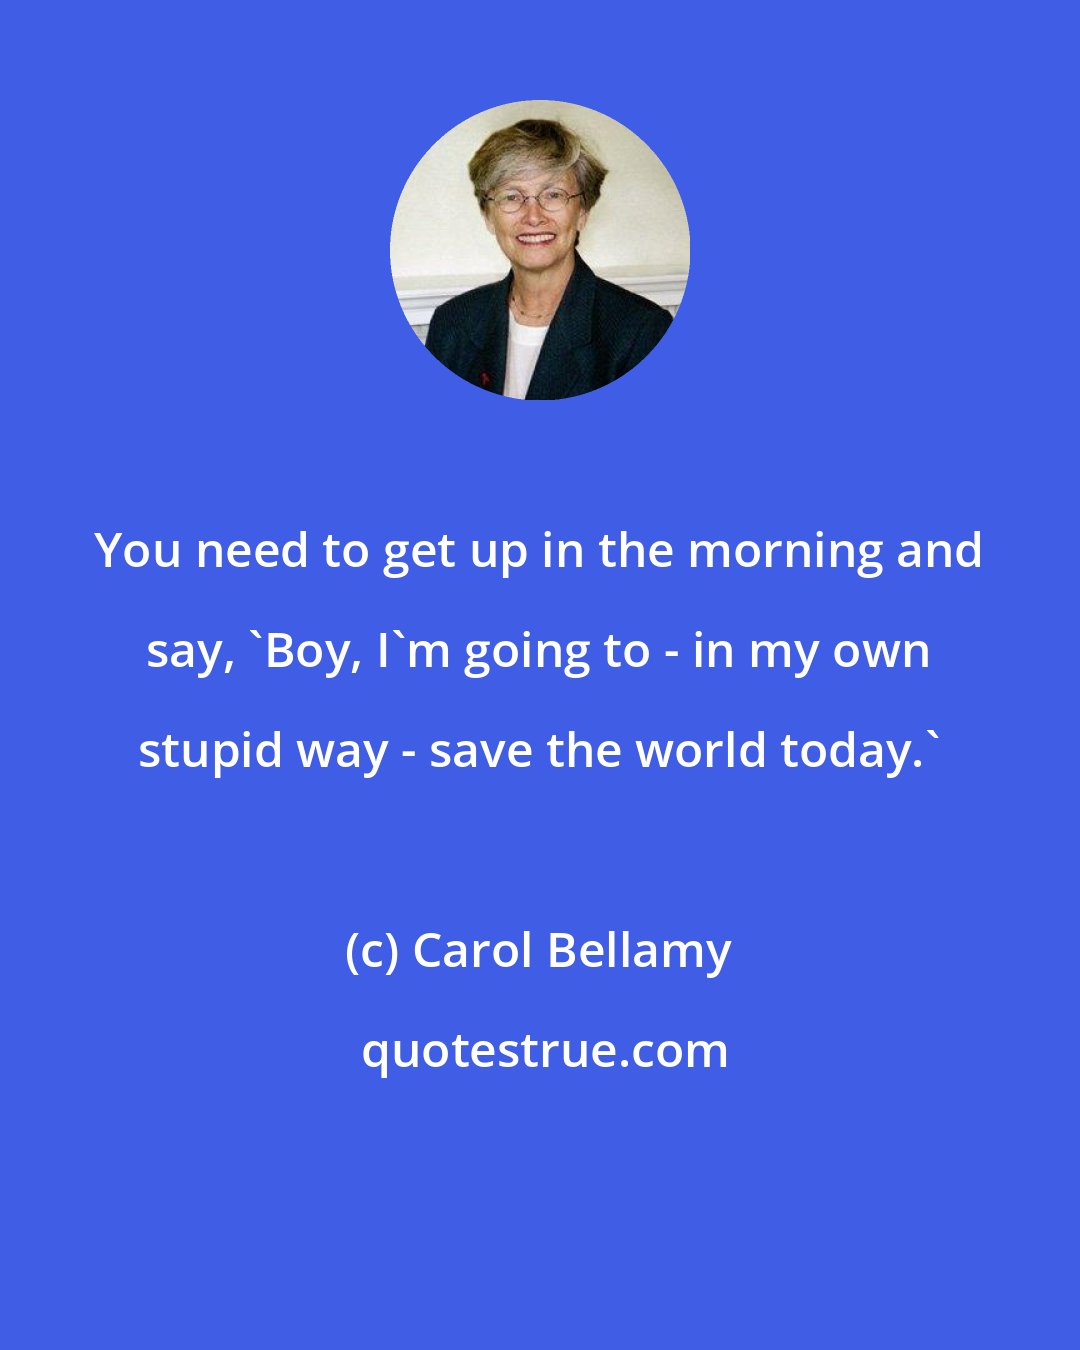 Carol Bellamy: You need to get up in the morning and say, 'Boy, I'm going to - in my own stupid way - save the world today.'